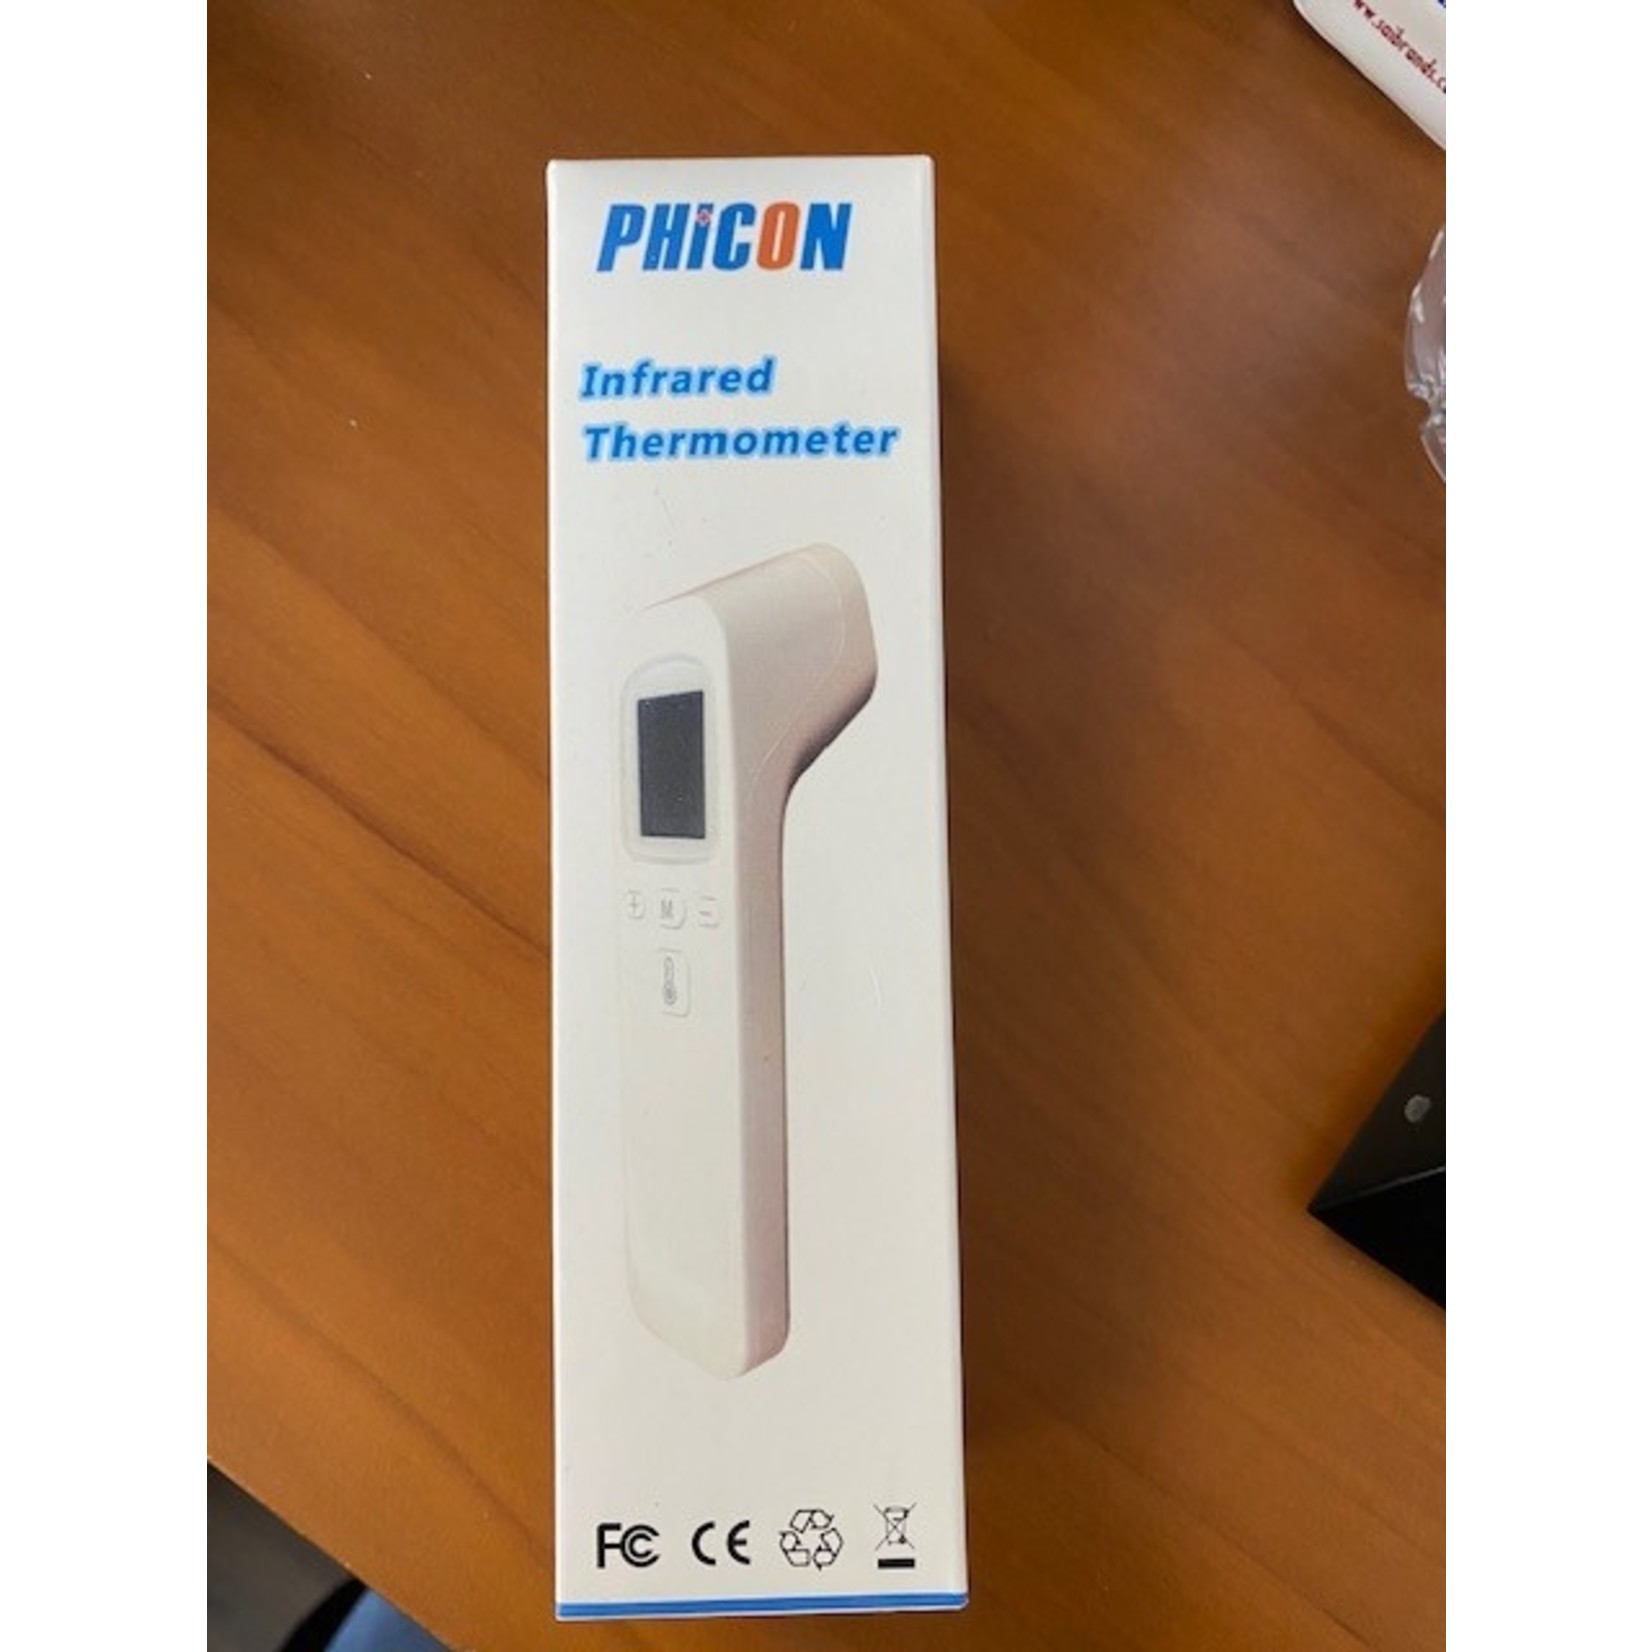 https://cdn.shoplightspeed.com/shops/652726/files/40886493/1652x1652x2/phicon-no-contact-infrared-thermometer.jpg